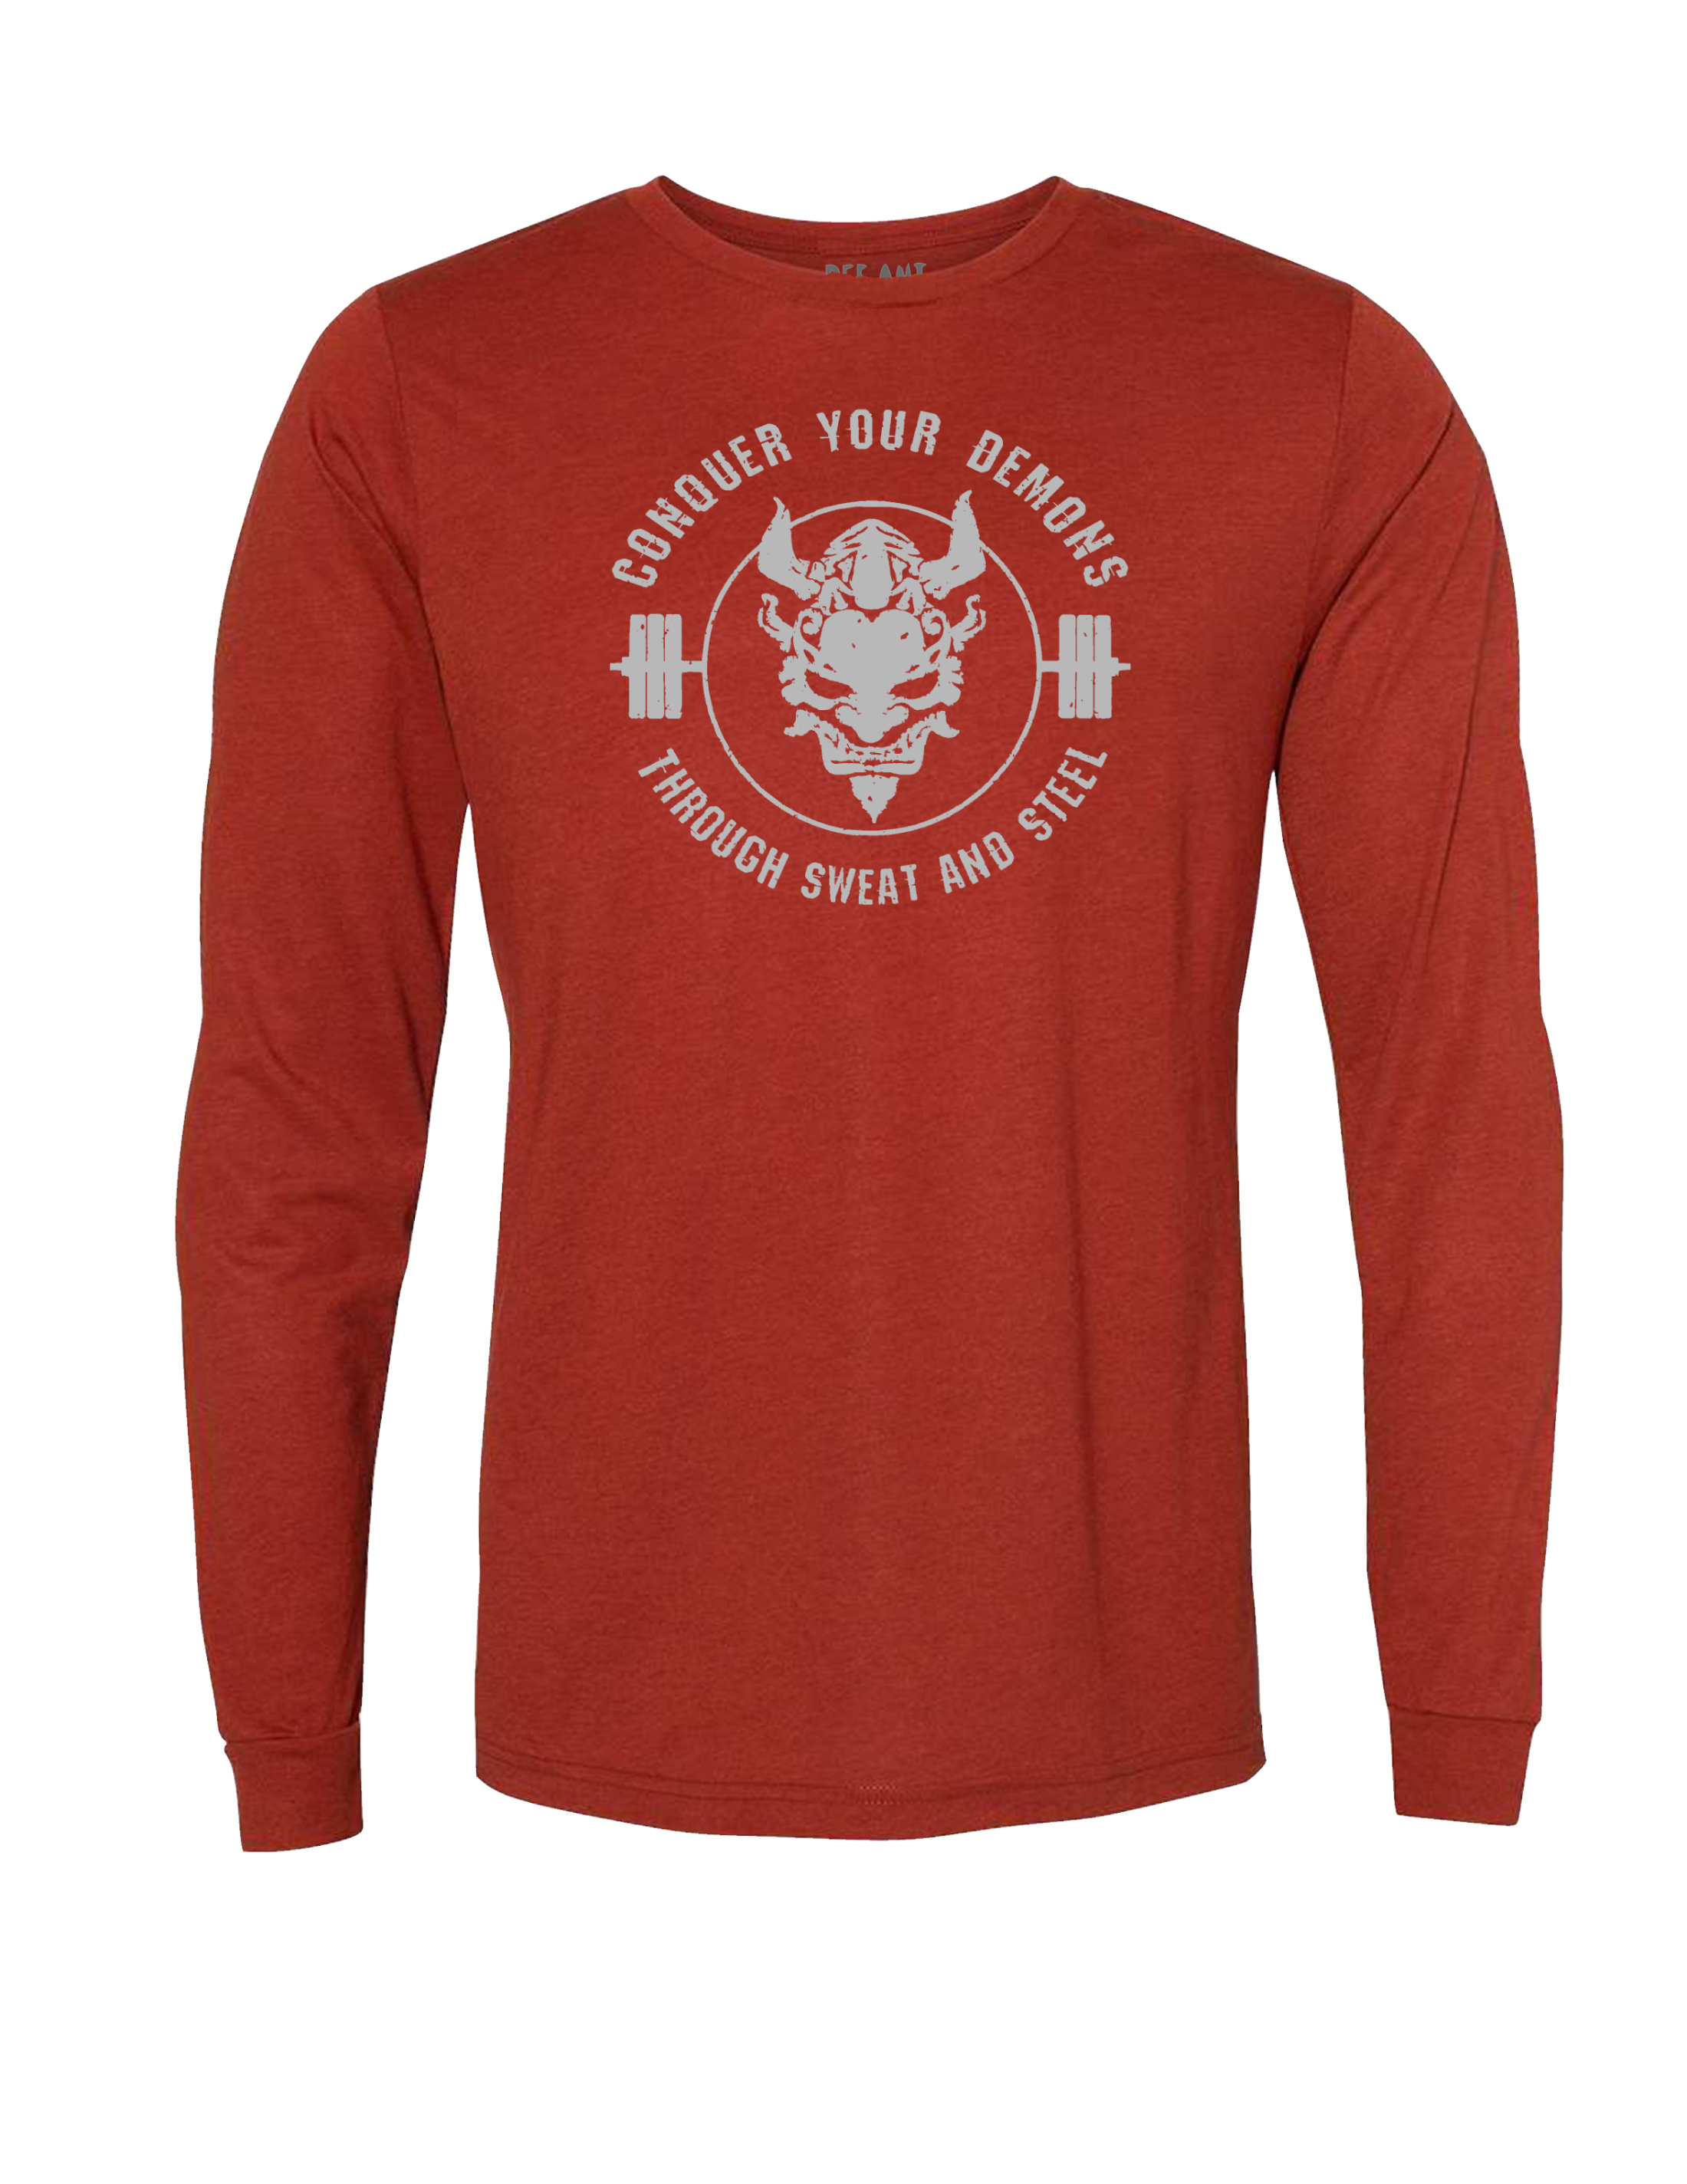 CONQUER YOUR DEMONS - LONG SLEEVE - BRICK -  LIMITED RUN!